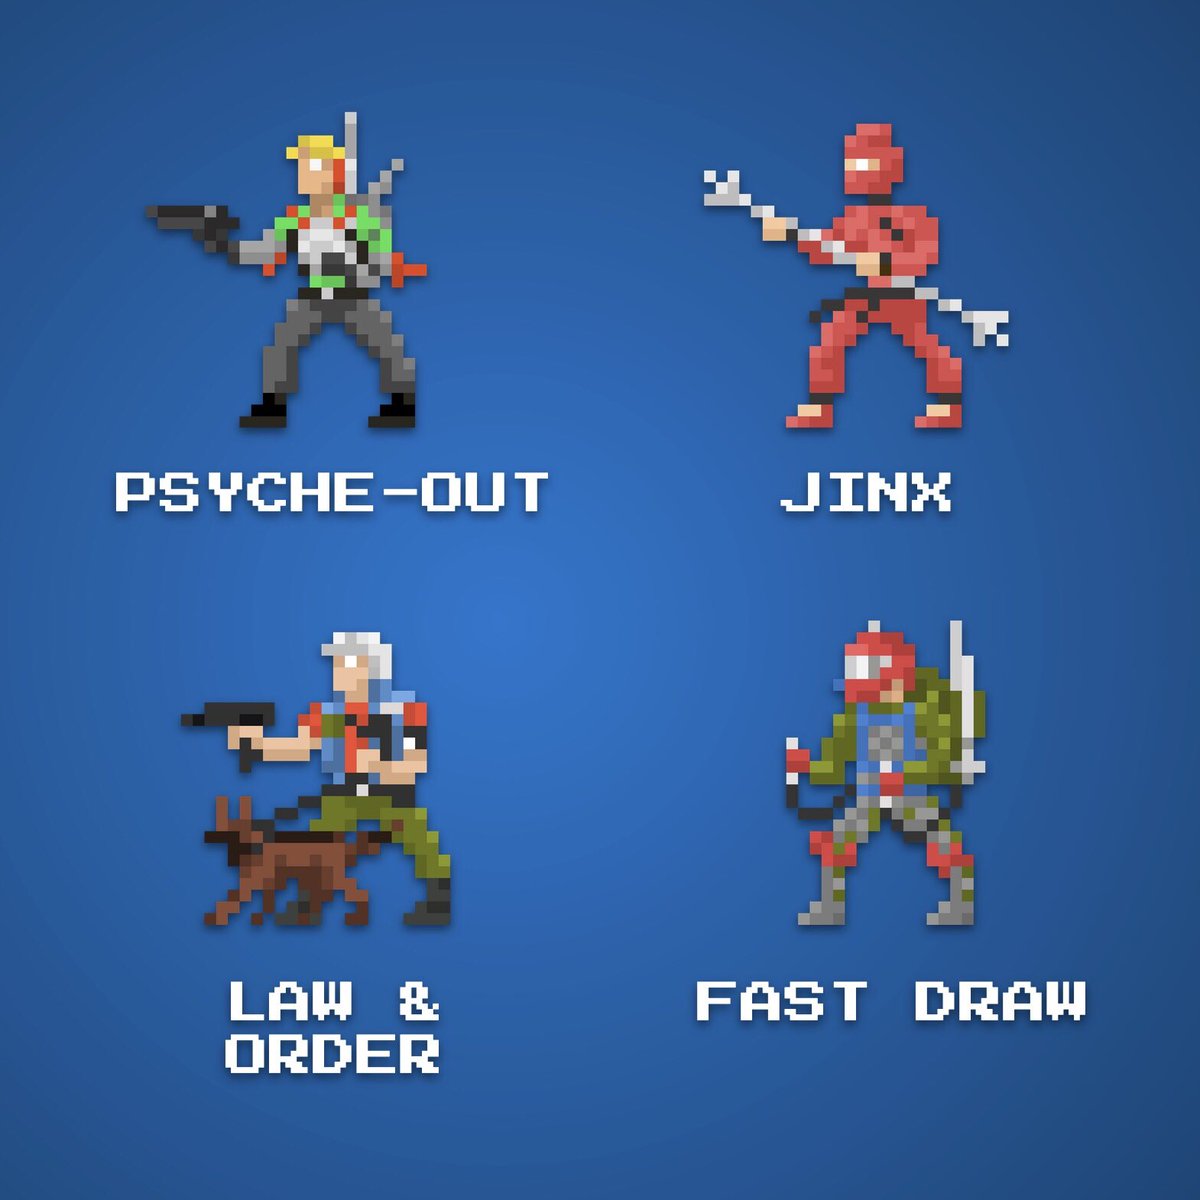 #joevember has officially passed, but I’ve still got the fever for making #pixelart #GIJoe sprites. Here are 4 more from the #ARAH class of ‘87, who’s your favorite from this bunch?